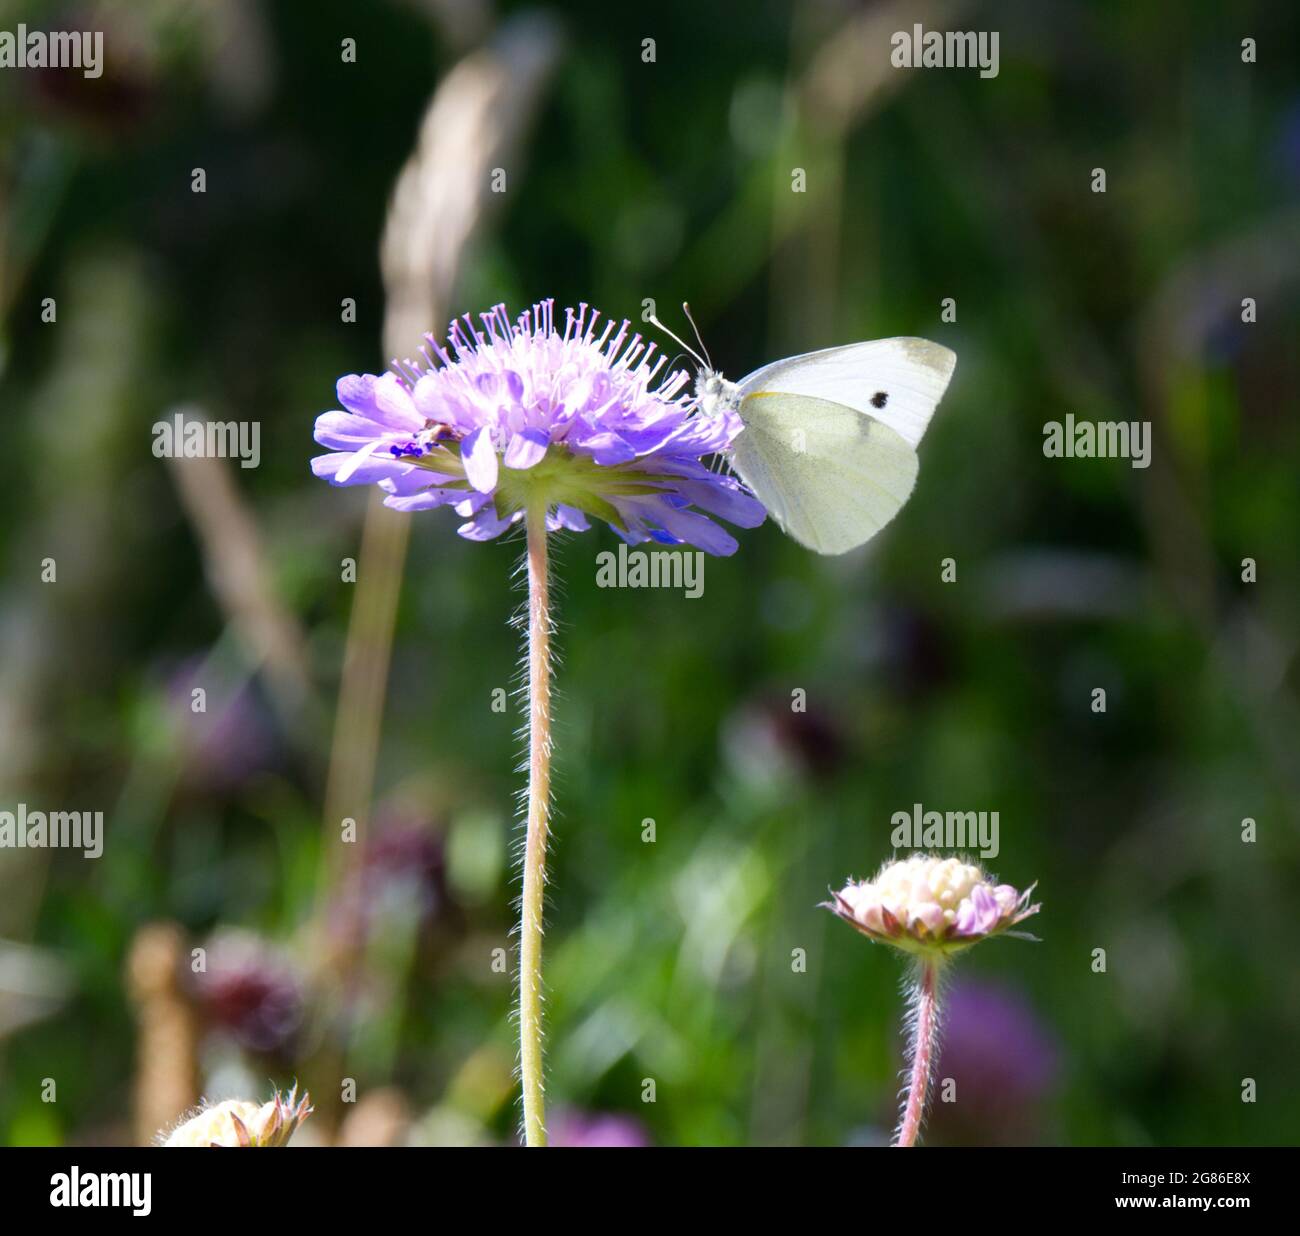 Summer flower of  Field scabious ( Knautia arvensis) with cabbage white butterfly (Pieris rapae) July UK Stock Photo